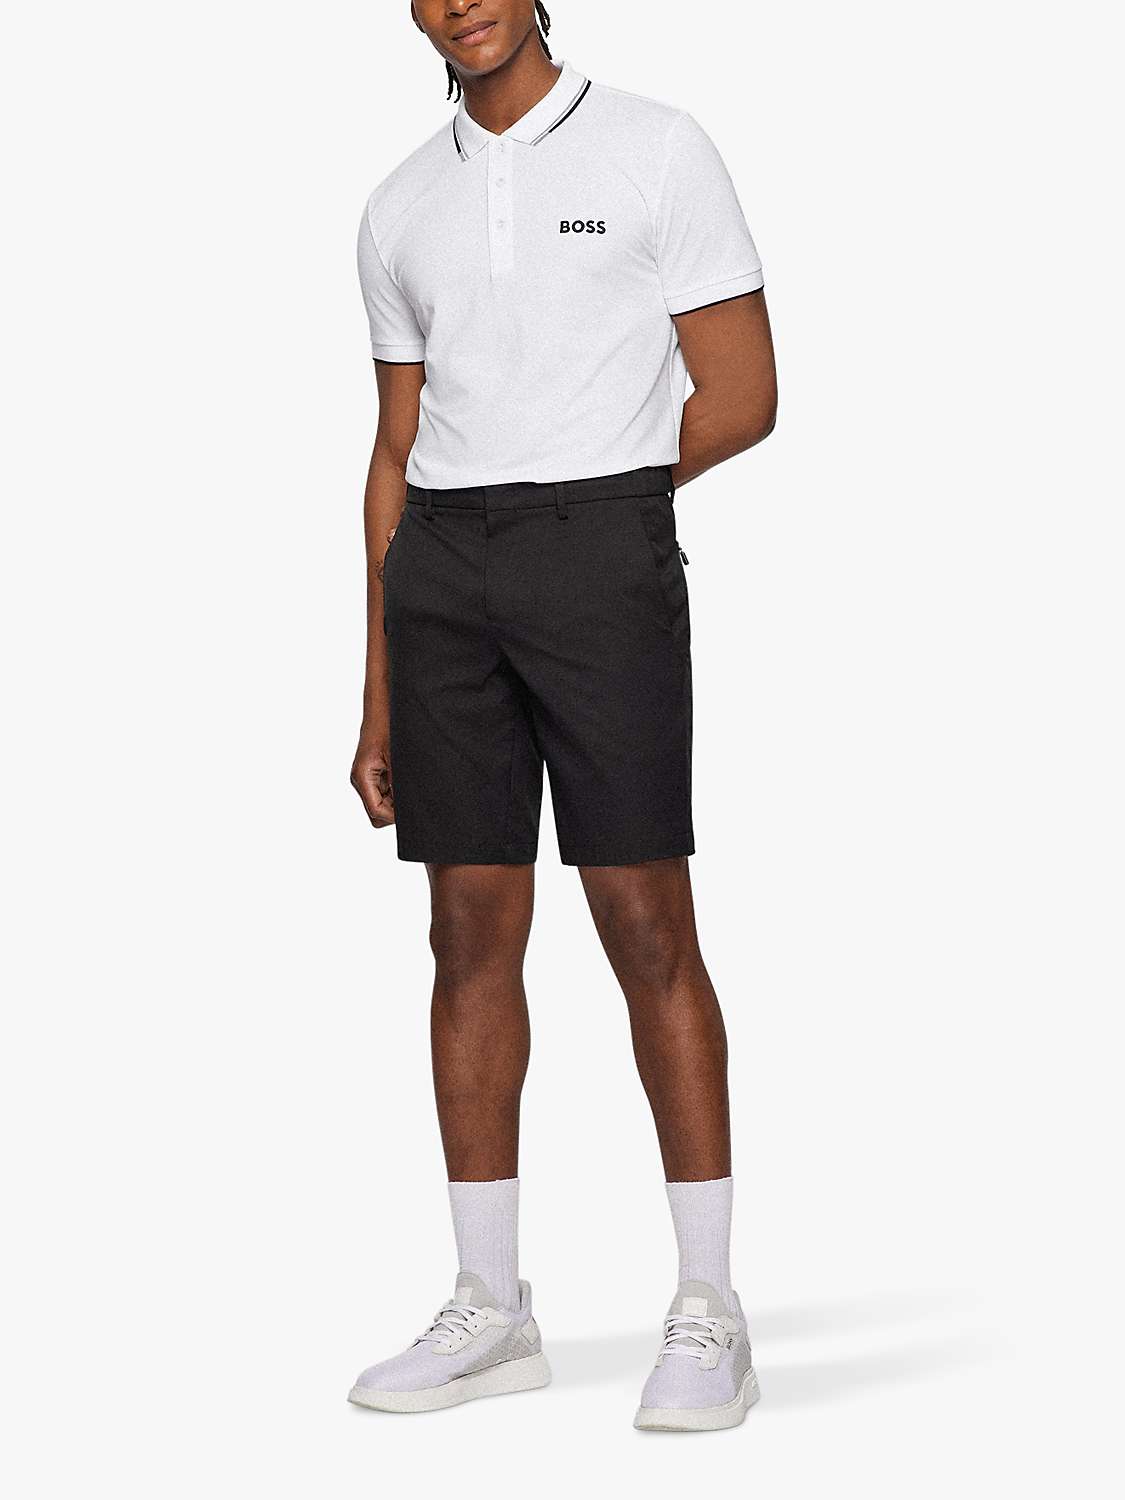 BOSS Paddy Pro Short Sleeve Polo Top, White at John Lewis & Partners